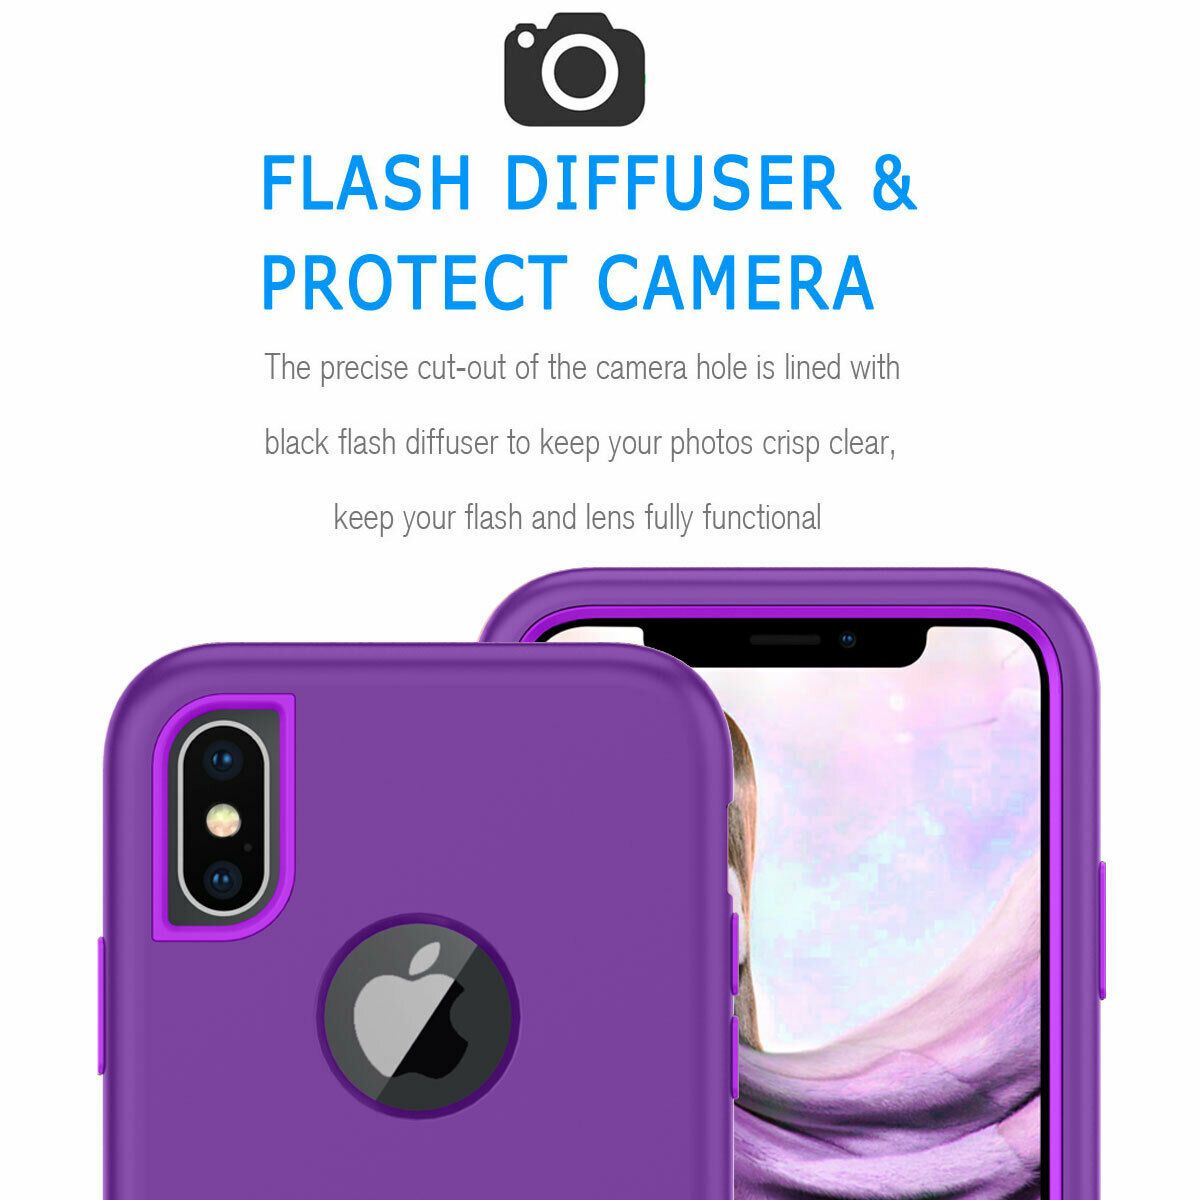 Case For iPhone X Xr XS Max 6 7 8 Plus Shockproof 360 Full Body Cover Protective detsarah 